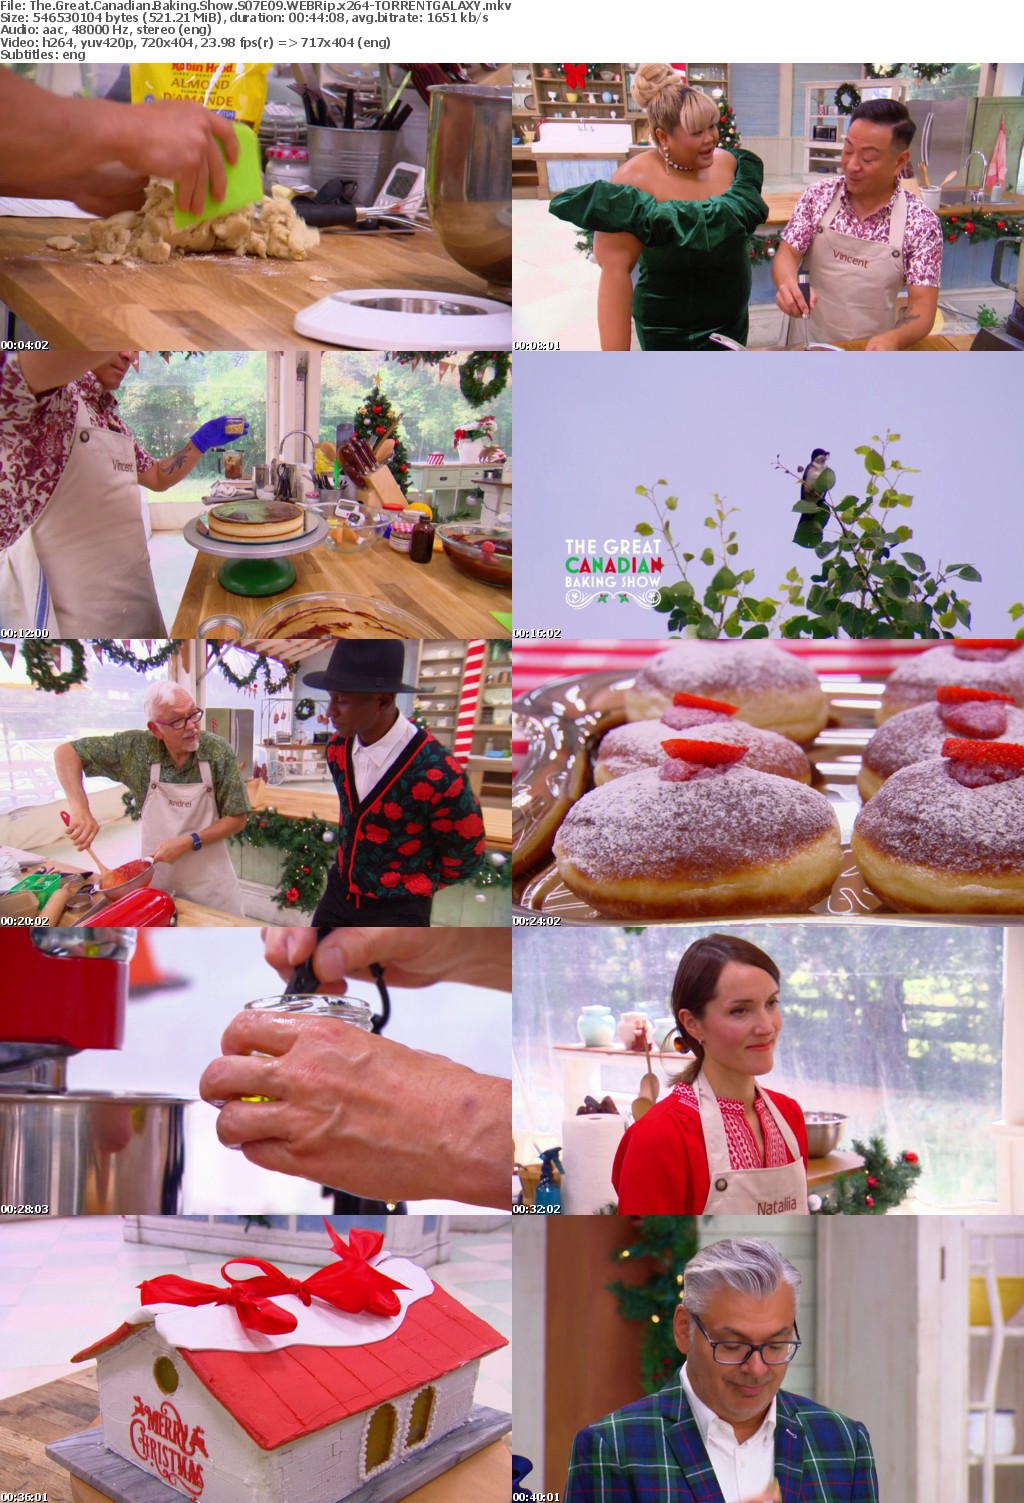 The Great Canadian Baking Show S07E09 WEBRip x264-GALAXY